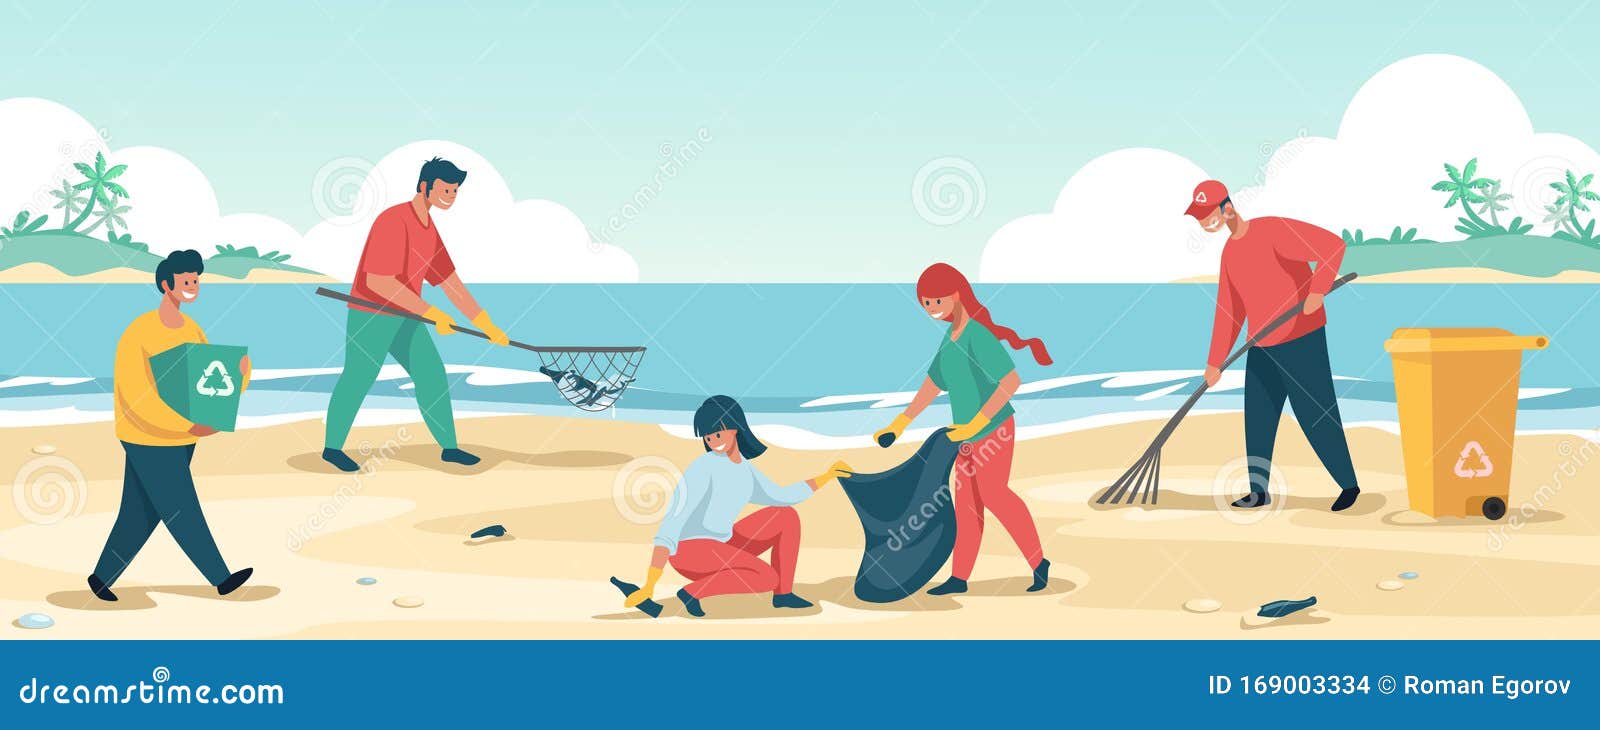 People Cleaning Beach. Cartoon Characters Collecting Trash and Save the ...